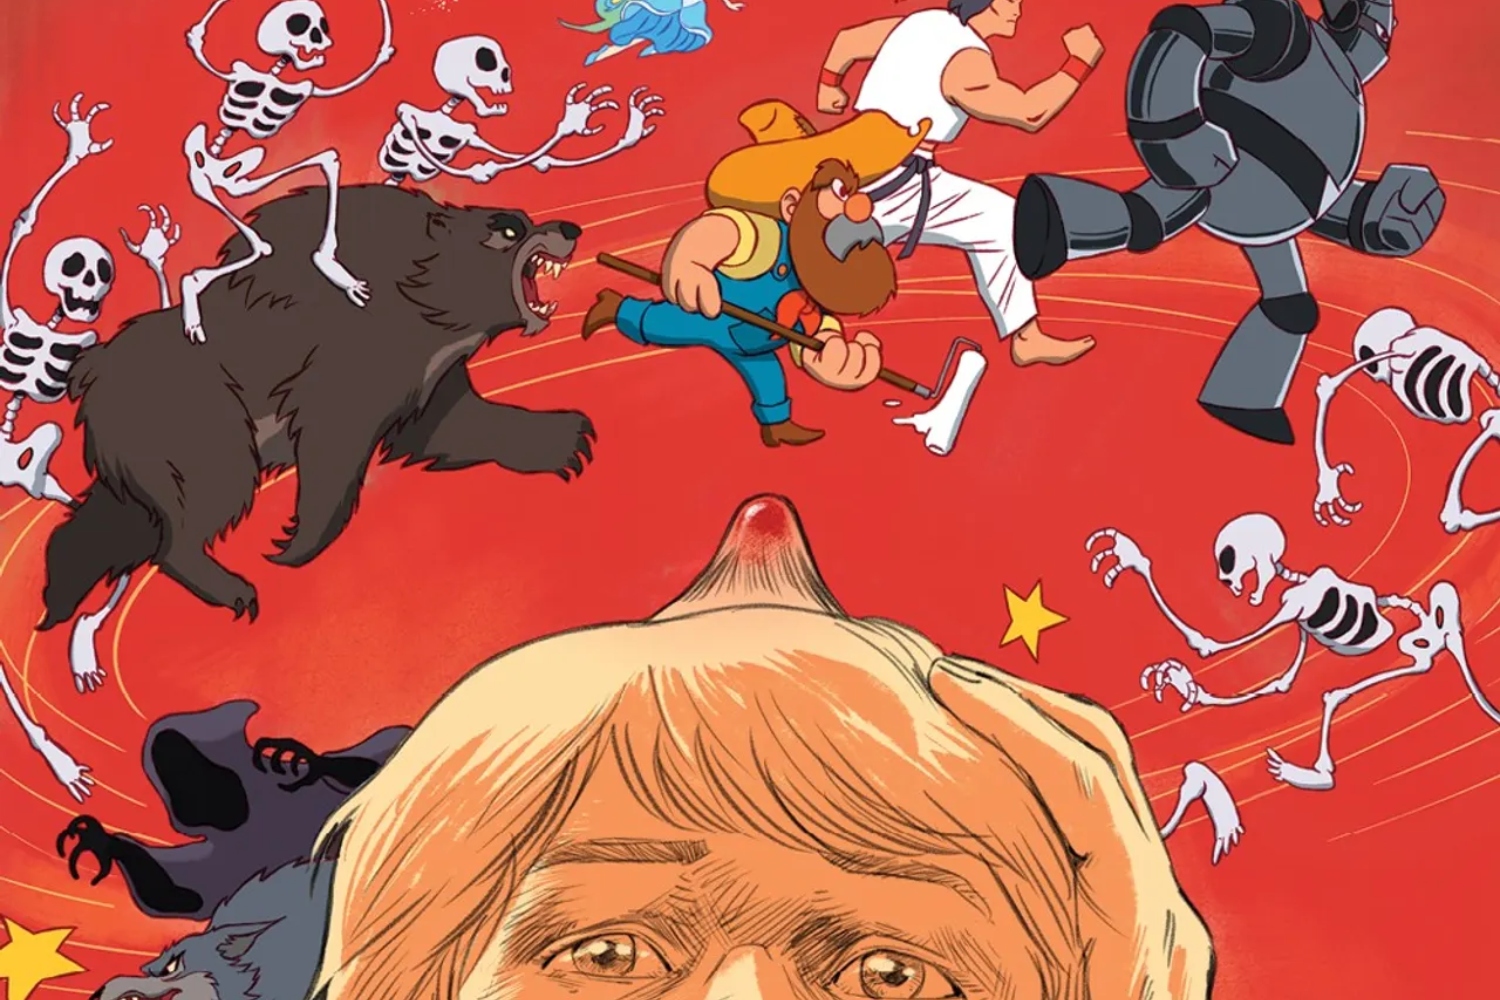 'Uncanny Valley' #3 is like a fun-loving cartoon wizard with life lessons galore